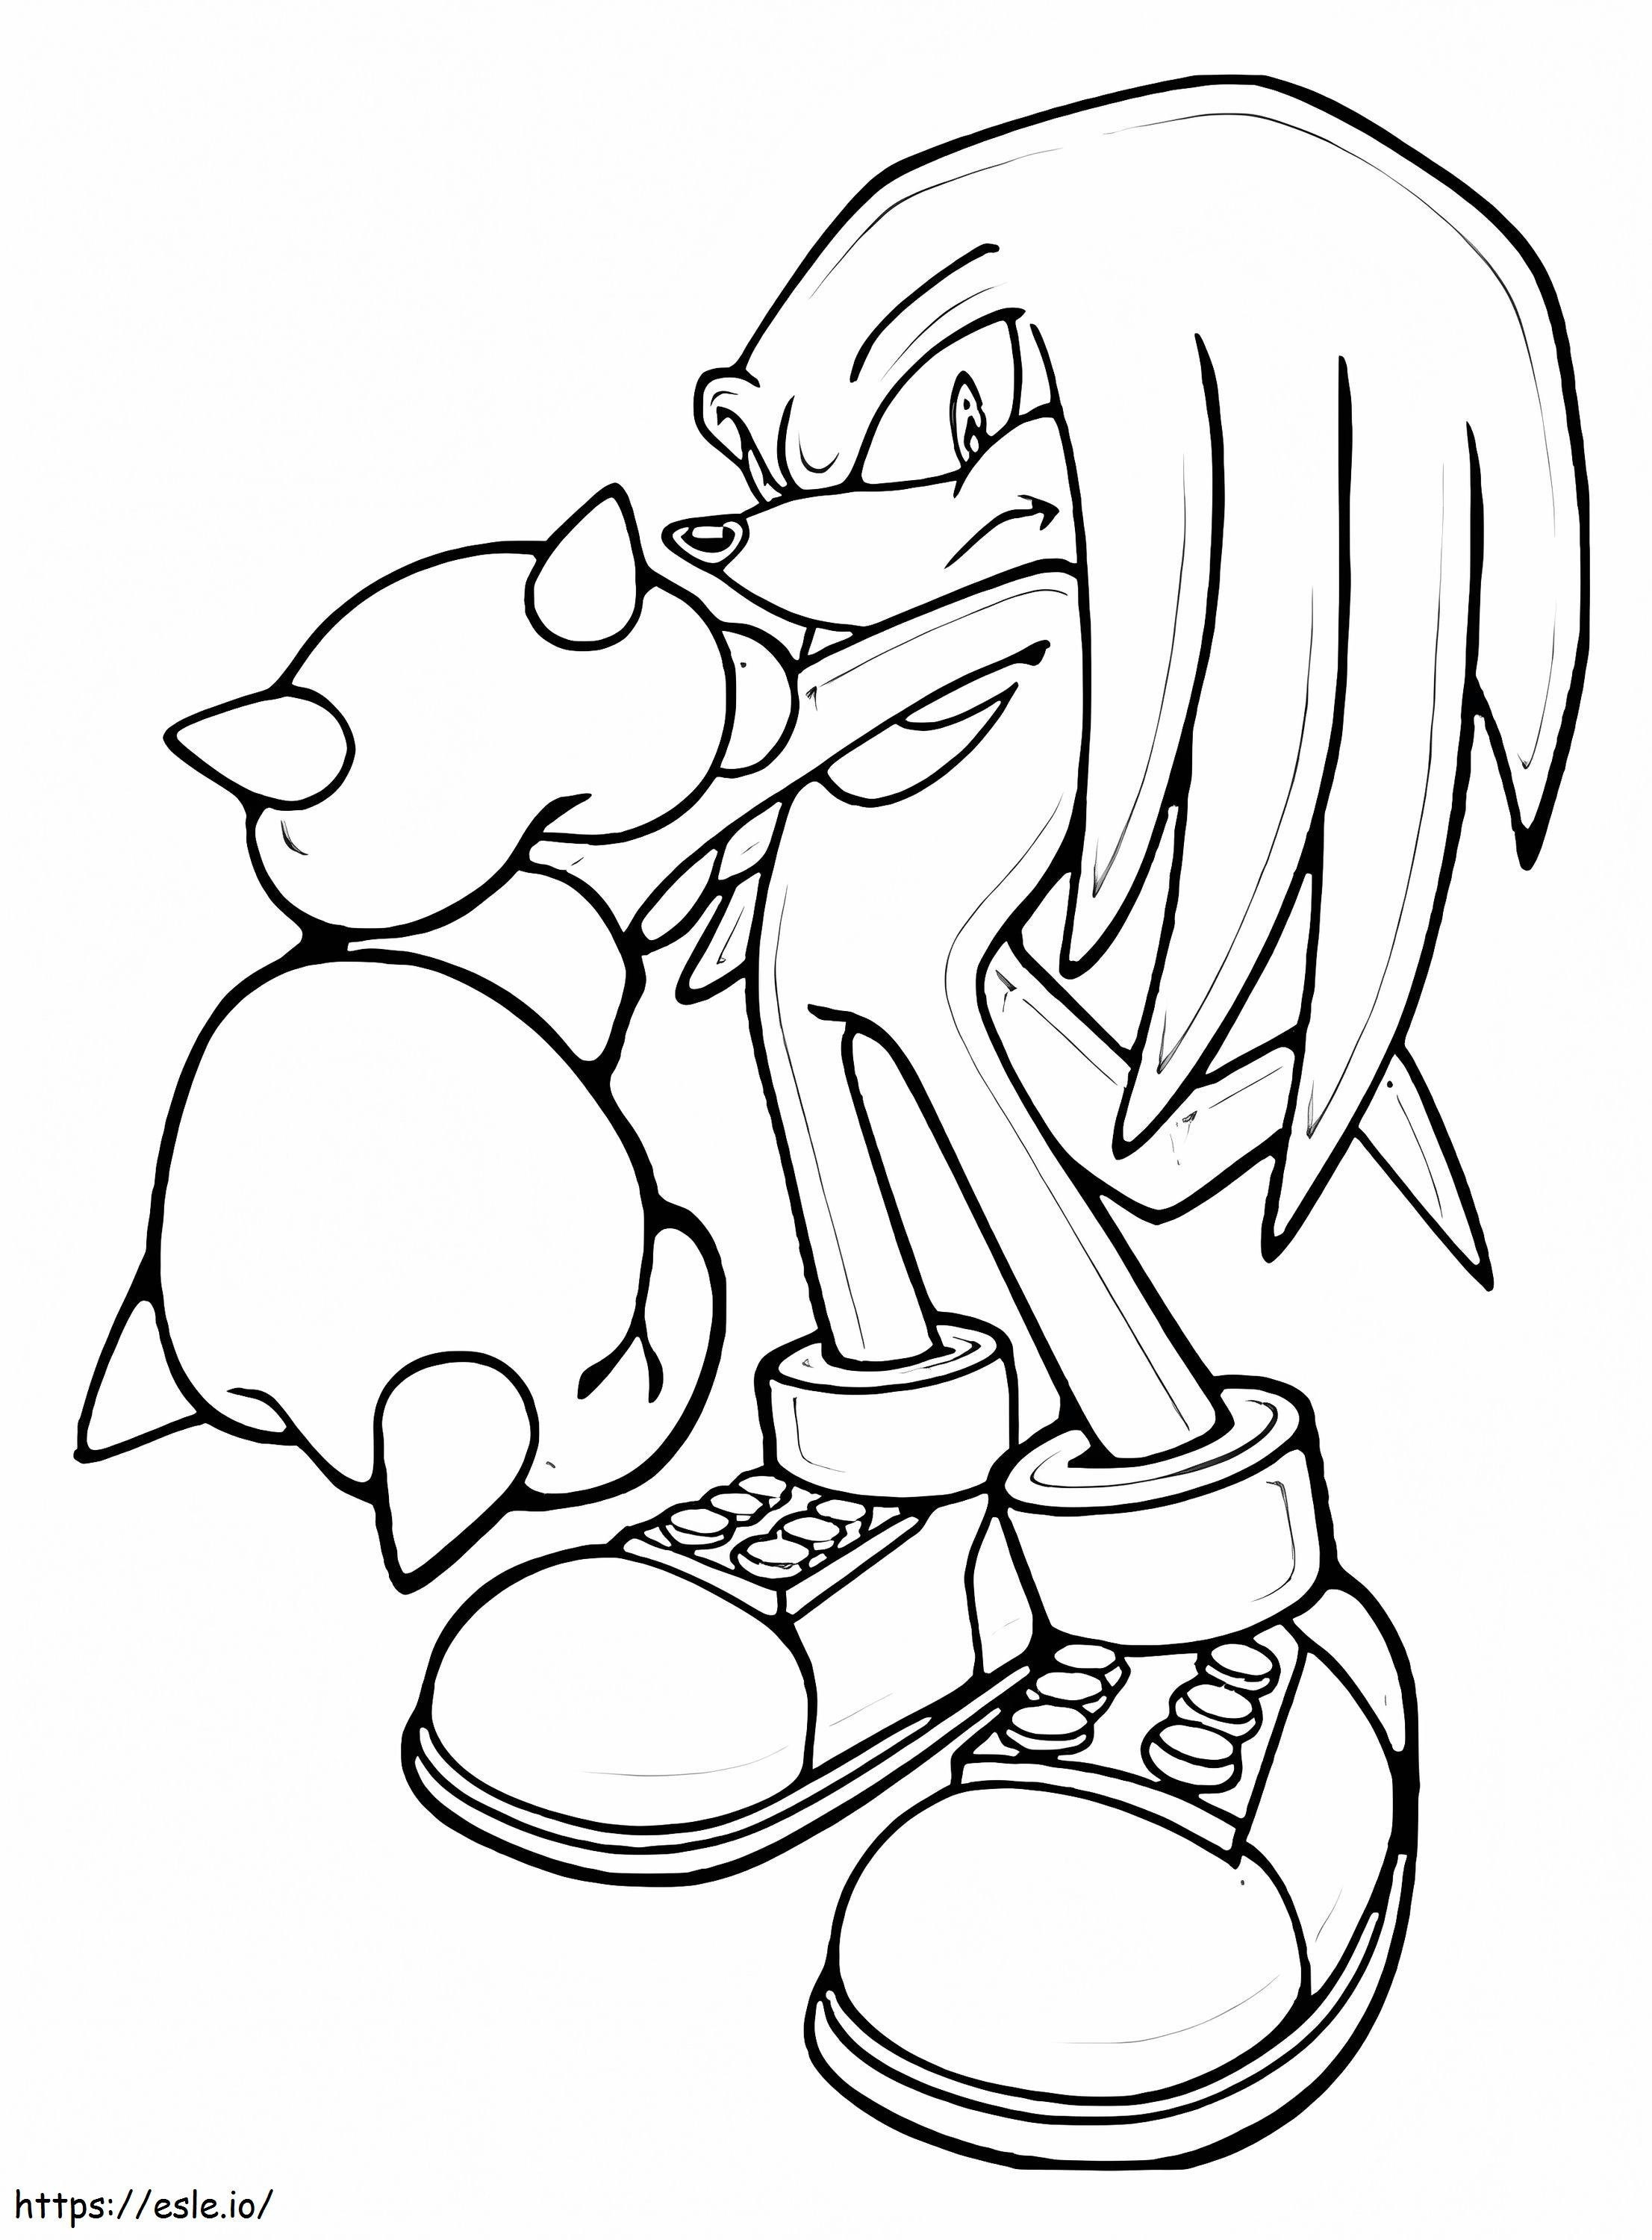 Knuckles Punch Break coloring page